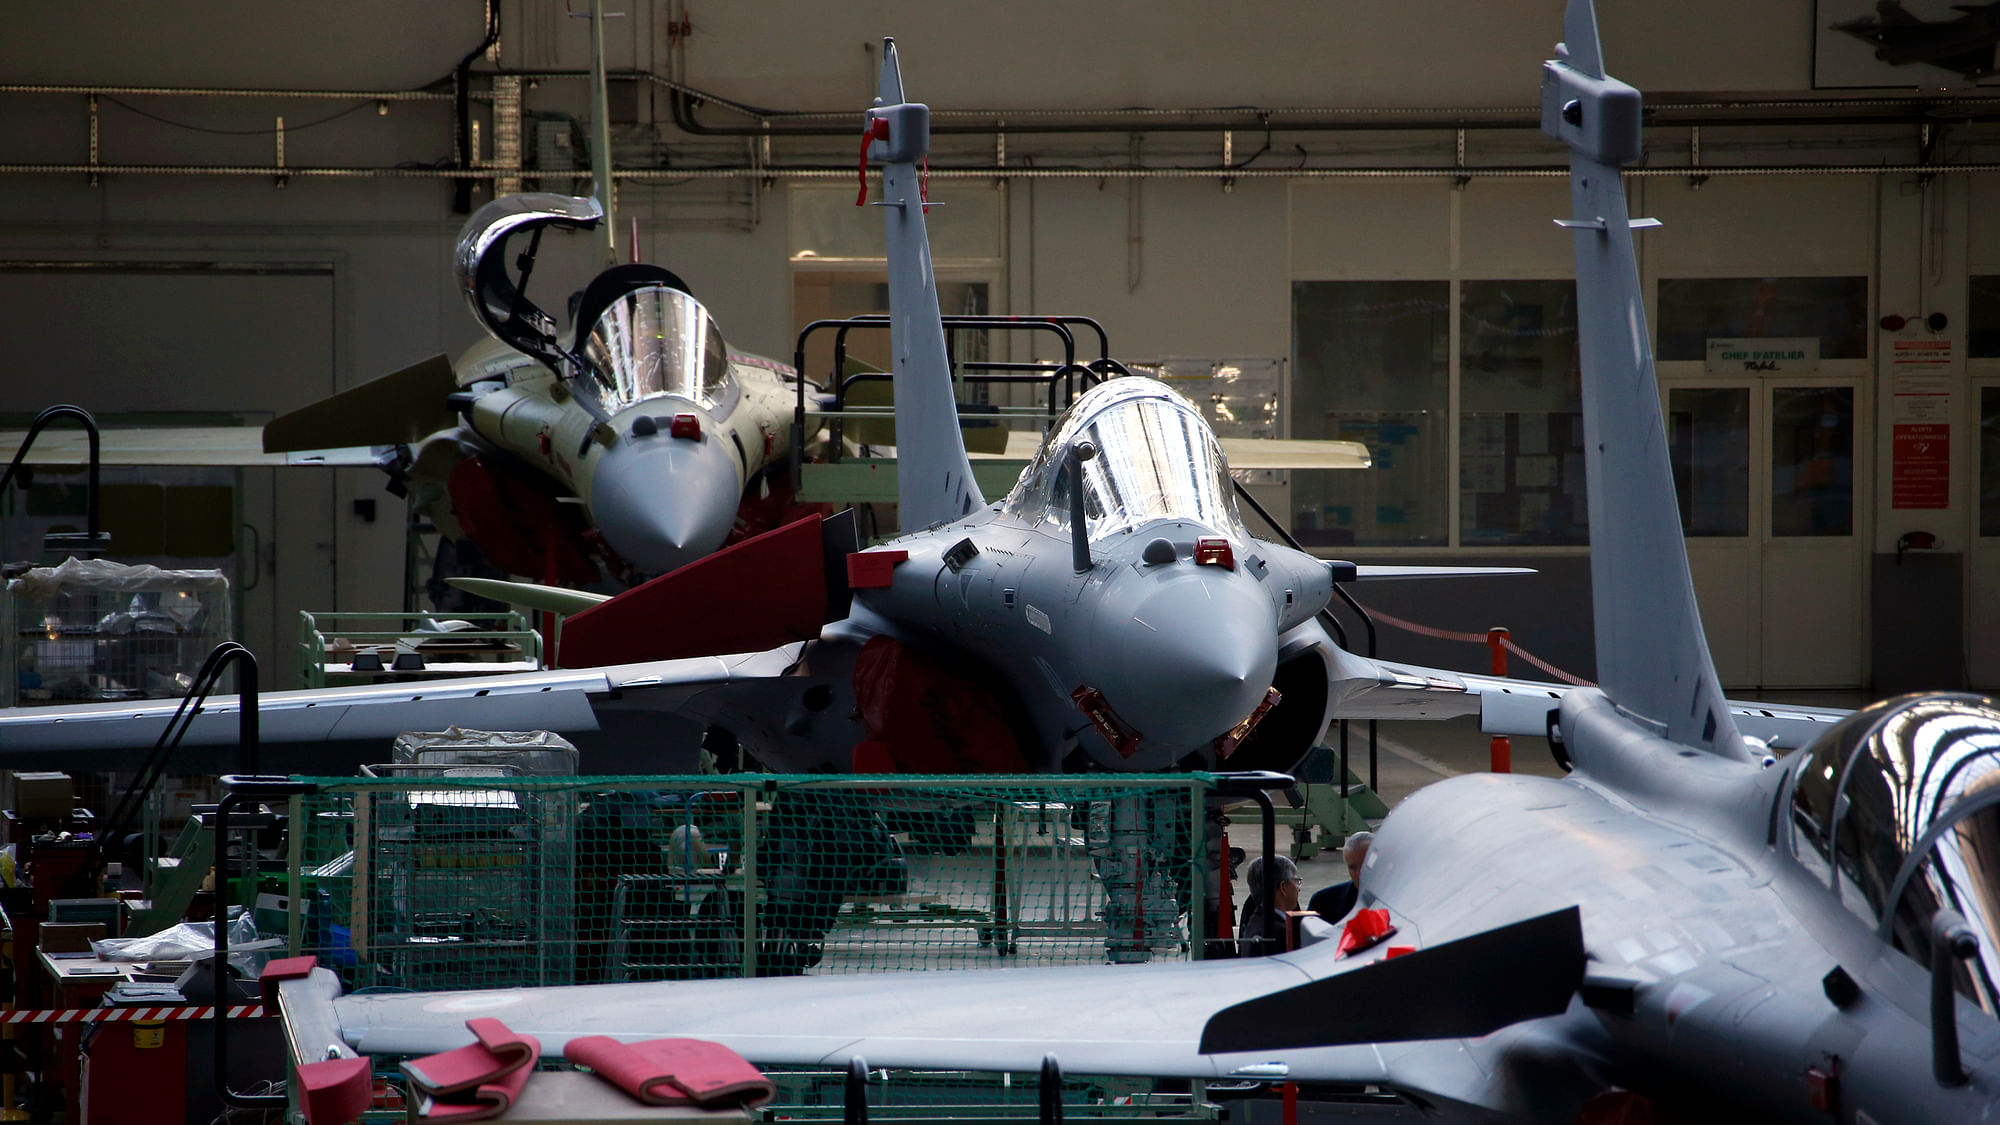 Rafale jet fighters on the assembly line in Dassault Aviation’s factory in Merignac, France. (Photo: Reuters)